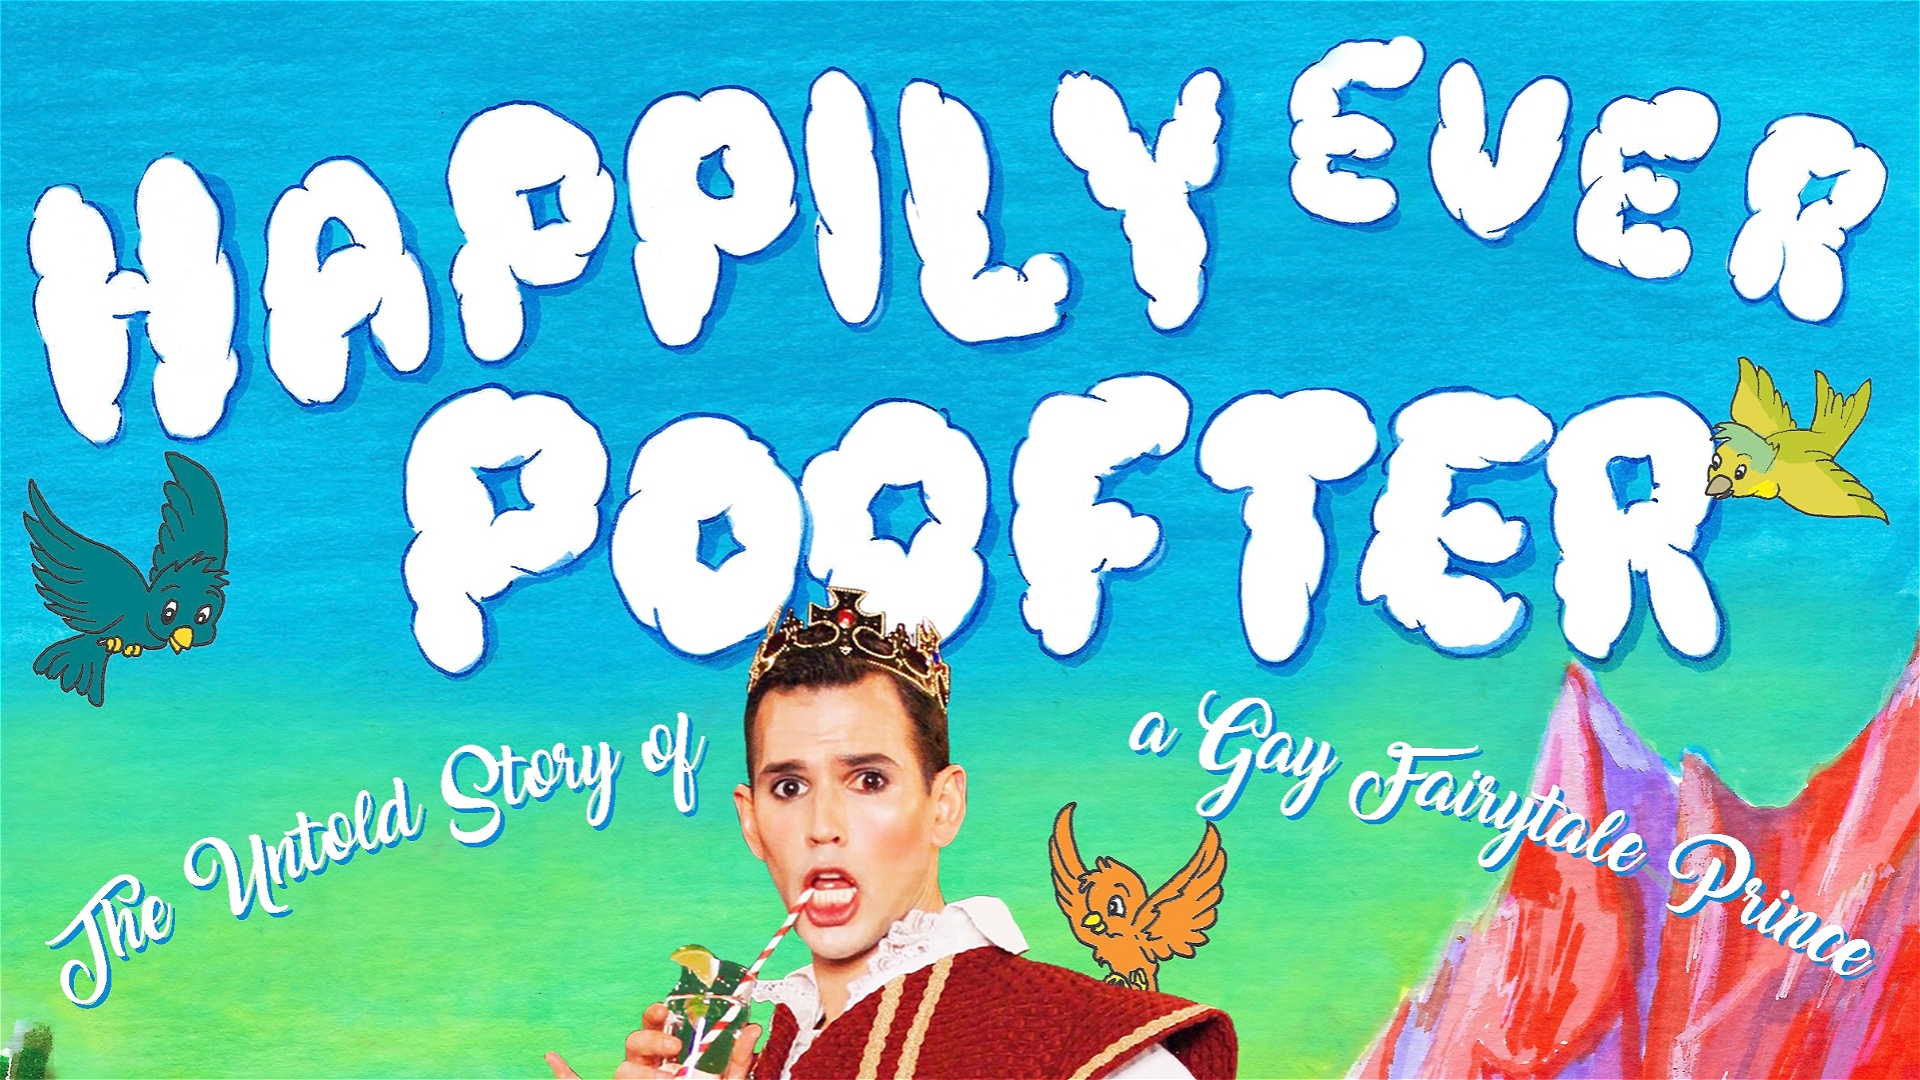 REVIEW: ‘Happily Ever Poofter’ by Rich Watkins